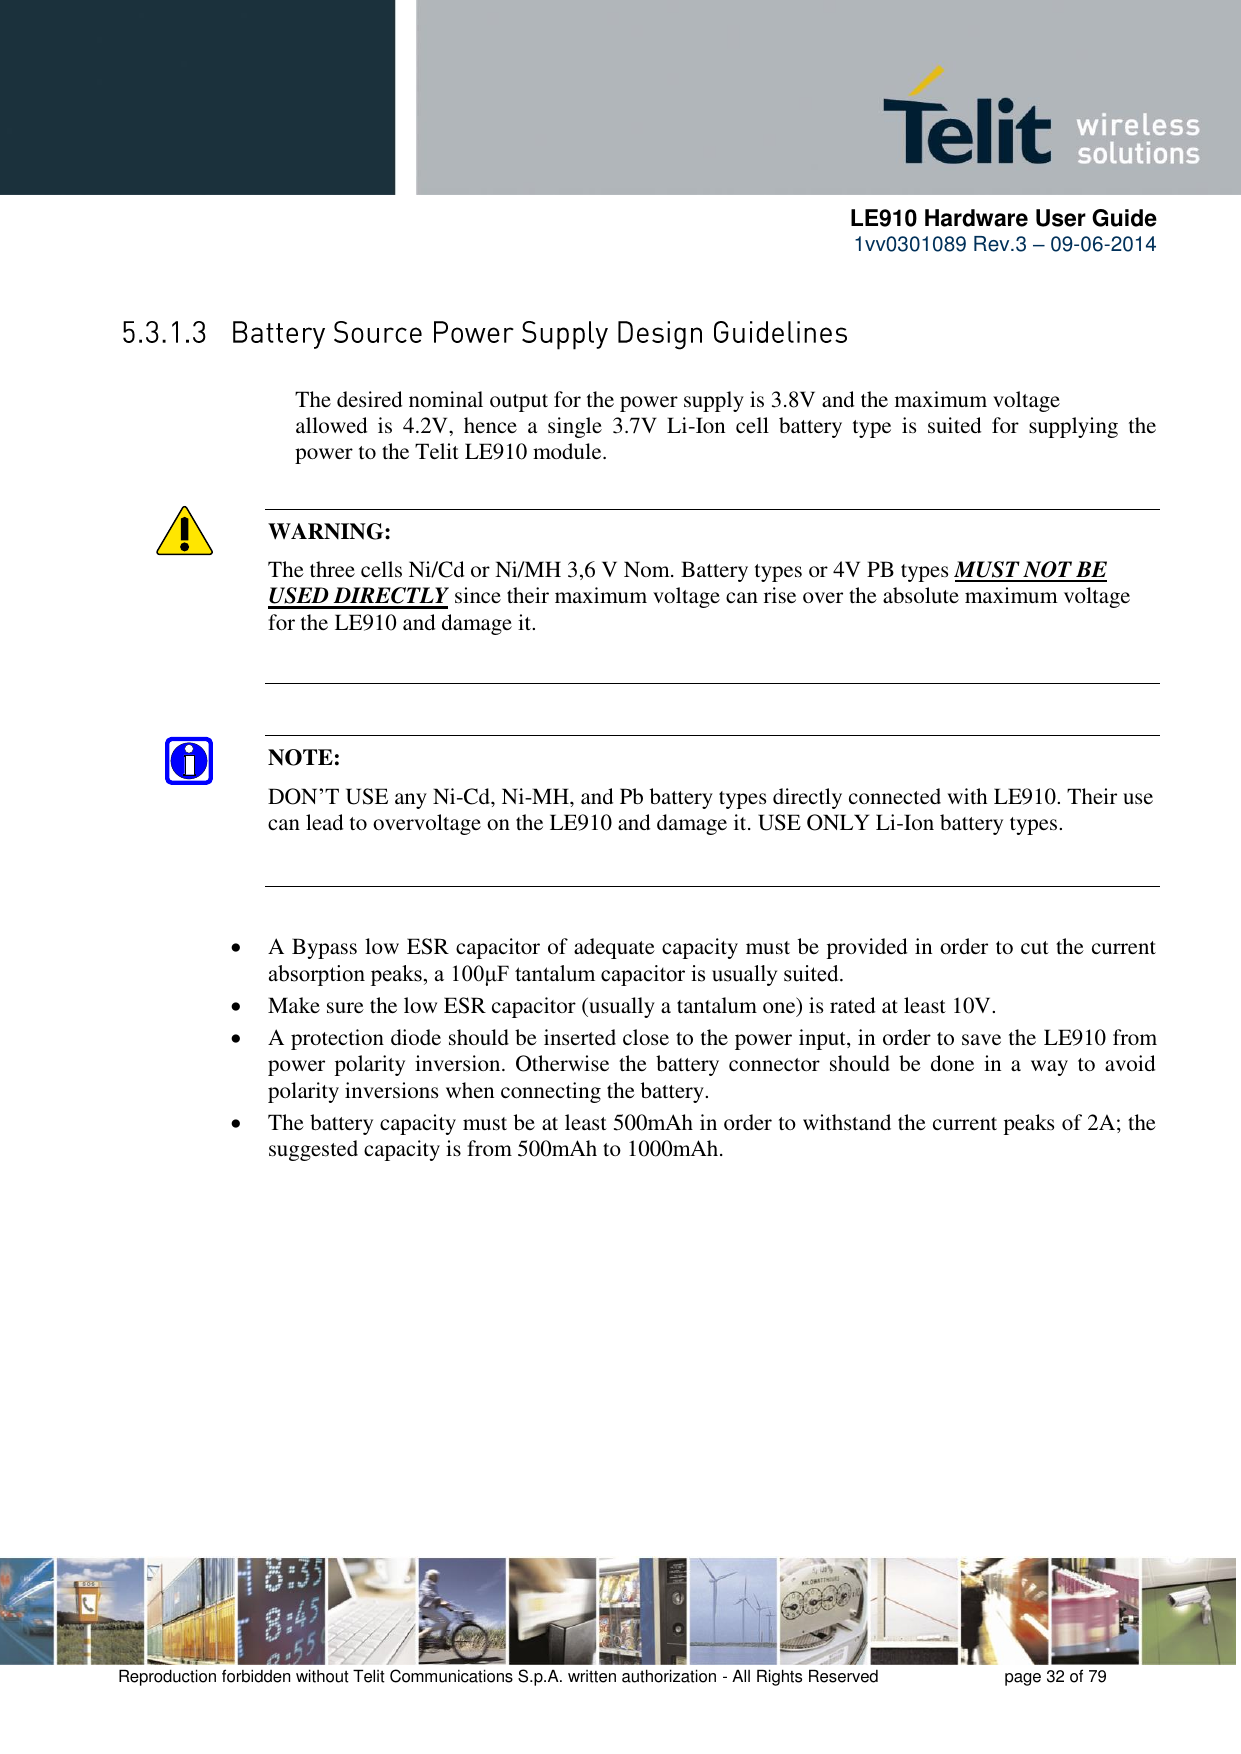      LE910 Hardware User Guide 1vv0301089 Rev.3 – 09-06-2014    Reproduction forbidden without Telit Communications S.p.A. written authorization - All Rights Reserved    page 32 of 79   The desired nominal output for the power supply is 3.8V and the maximum voltage      allowed  is  4.2V,  hence  a  single  3.7V  Li-Ion  cell  battery  type  is  suited  for  supplying  the     power to the Telit LE910 module.  WARNING: The three cells Ni/Cd or Ni/MH 3,6 V Nom. Battery types or 4V PB types MUST NOT BE USED DIRECTLY since their maximum voltage can rise over the absolute maximum voltage for the LE910 and damage it.   NOTE: DON’T USE any Ni-Cd, Ni-MH, and Pb battery types directly connected with LE910. Their use can lead to overvoltage on the LE910 and damage it. USE ONLY Li-Ion battery types.  A Bypass low ESR capacitor of adequate capacity must be provided in order to cut the current absorption peaks, a 100μF tantalum capacitor is usually suited.  Make sure the low ESR capacitor (usually a tantalum one) is rated at least 10V.  A protection diode should be inserted close to the power input, in order to save the LE910 from power  polarity  inversion. Otherwise the  battery connector  should be  done  in a  way to  avoid polarity inversions when connecting the battery.  The battery capacity must be at least 500mAh in order to withstand the current peaks of 2A; the suggested capacity is from 500mAh to 1000mAh. 